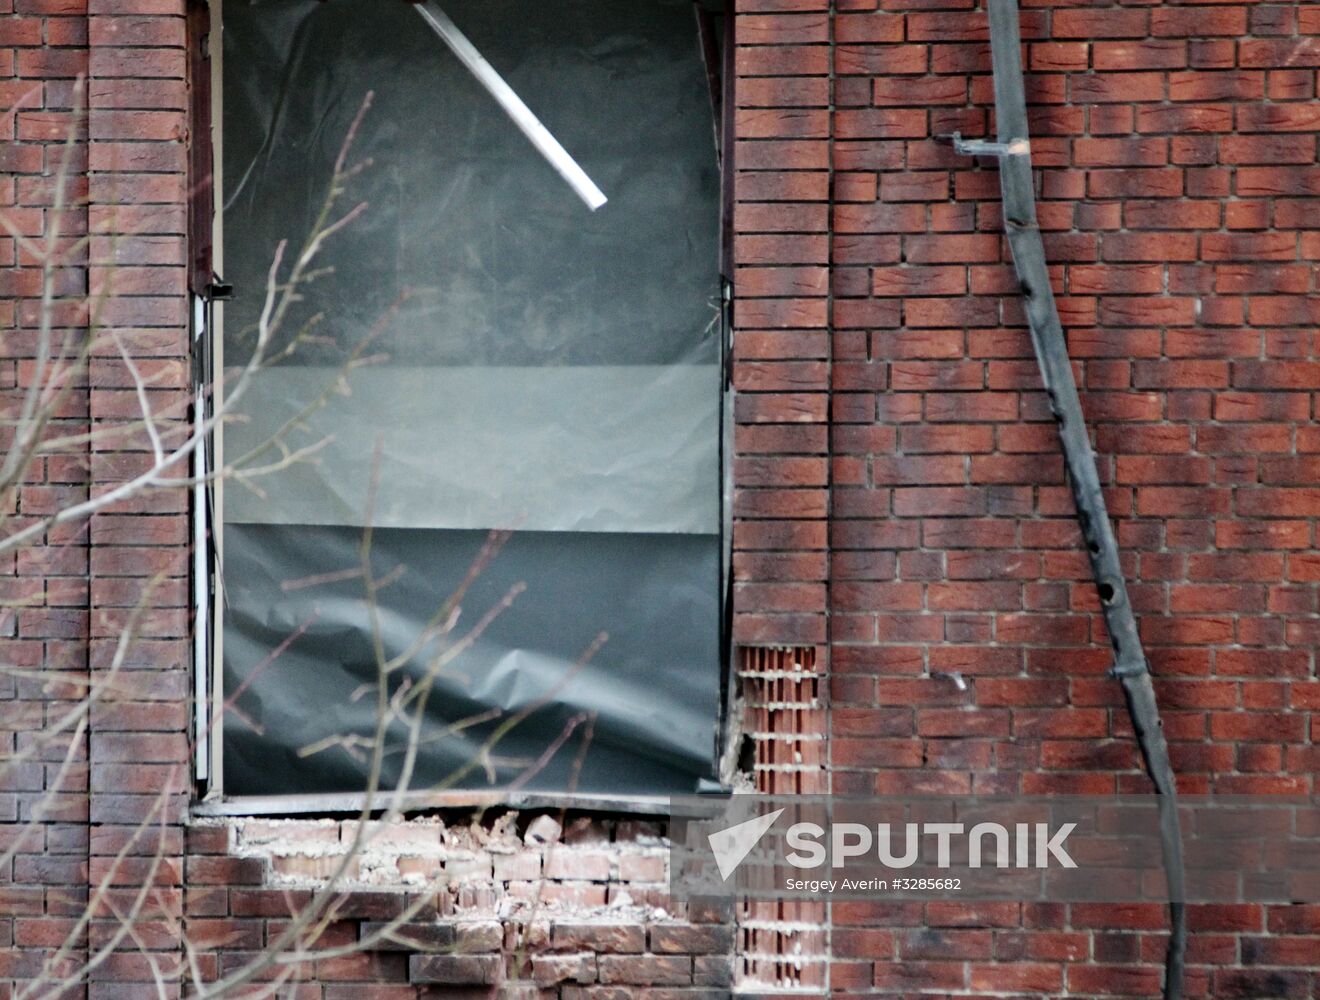 Aftermath of grenade launcher attack on DPR Defense Ministry in Donetsk